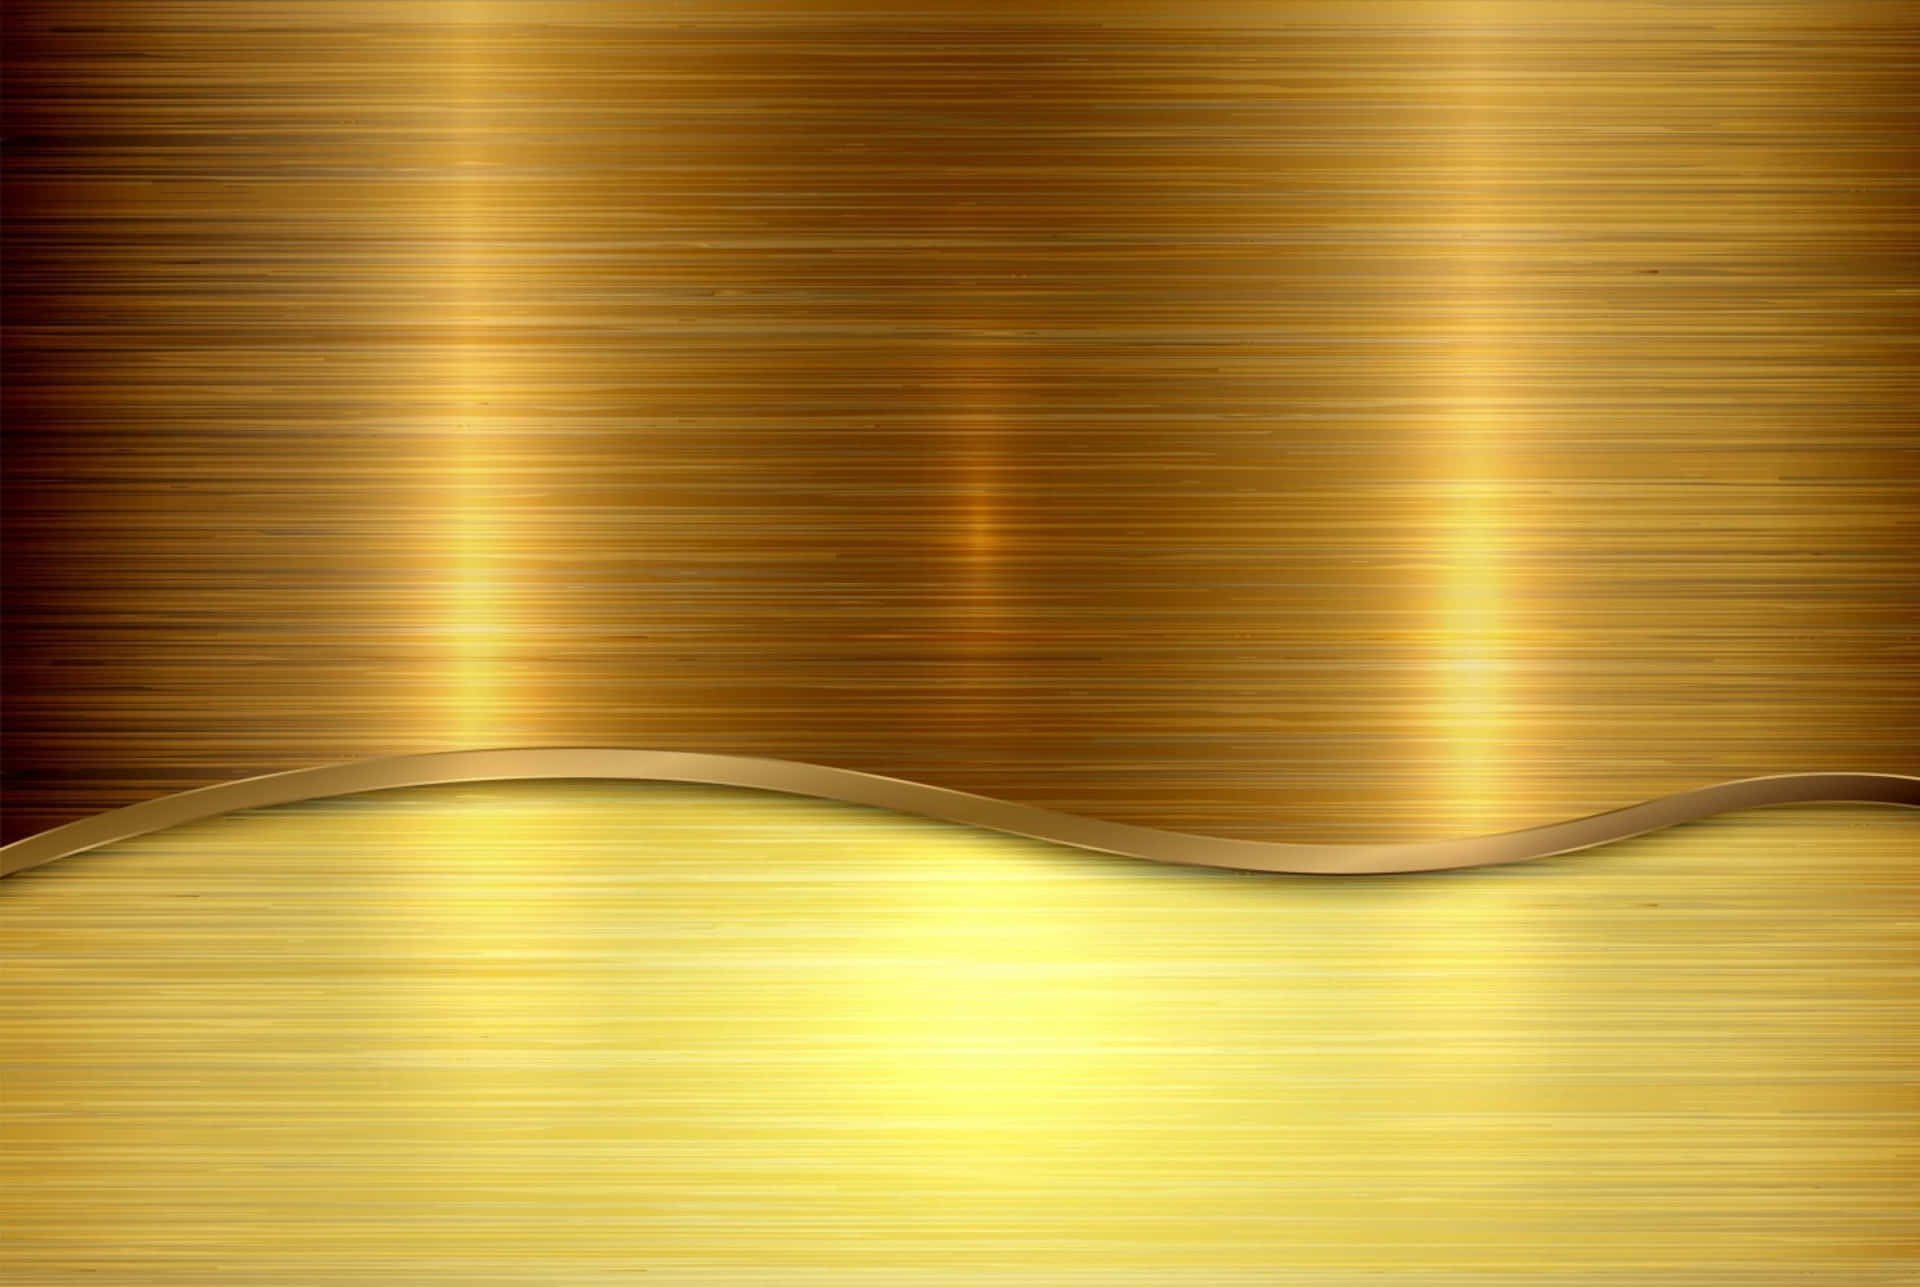 Bronze And Golden Waves Background